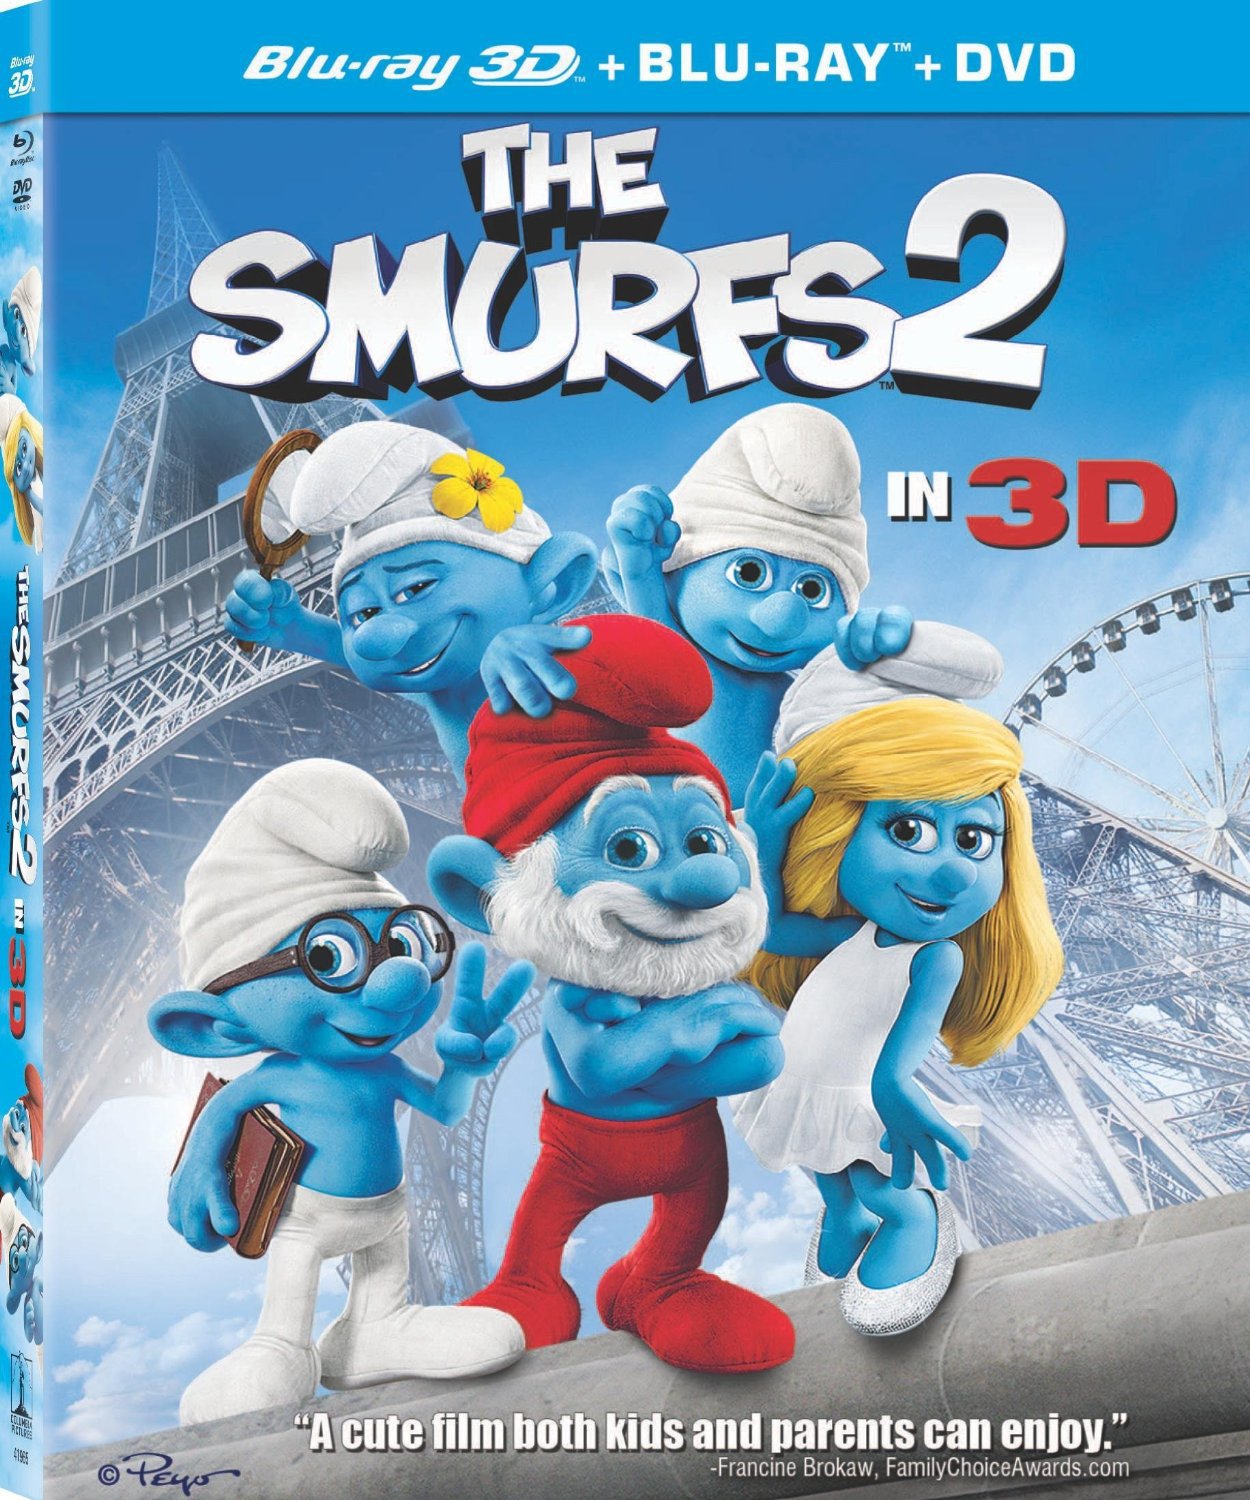 Smurfs 2 in 3D, The